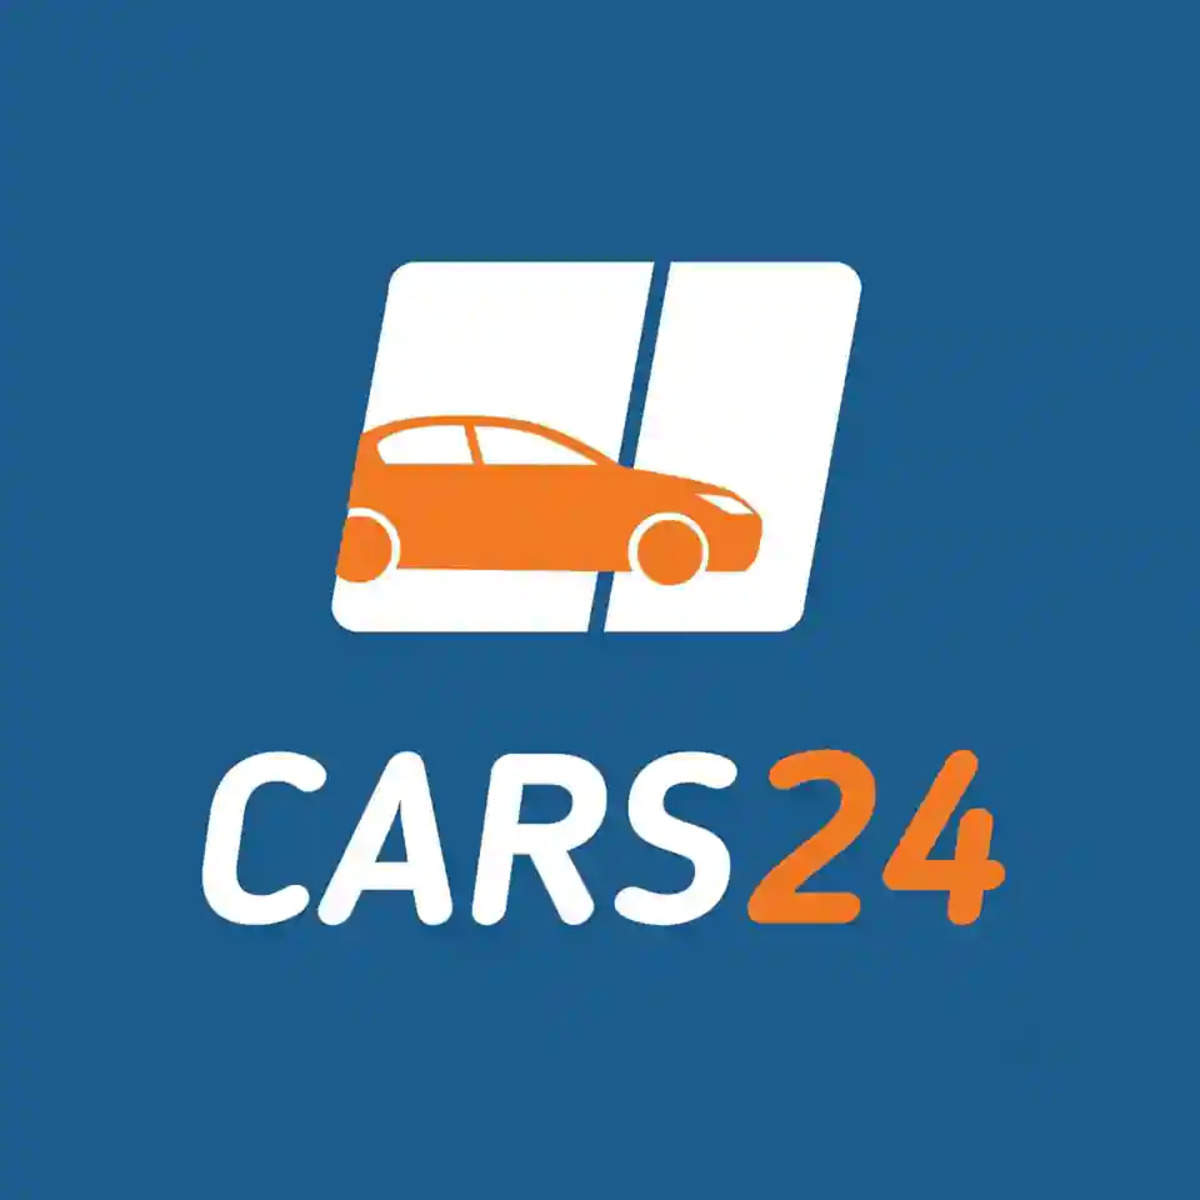 CARS24.com, A Tech Enabled Used Car Company Launches Its 100th Branch –  e-Commerce, Startup, Technology, Mobile, Digital India, Internet Retail,  Social Media